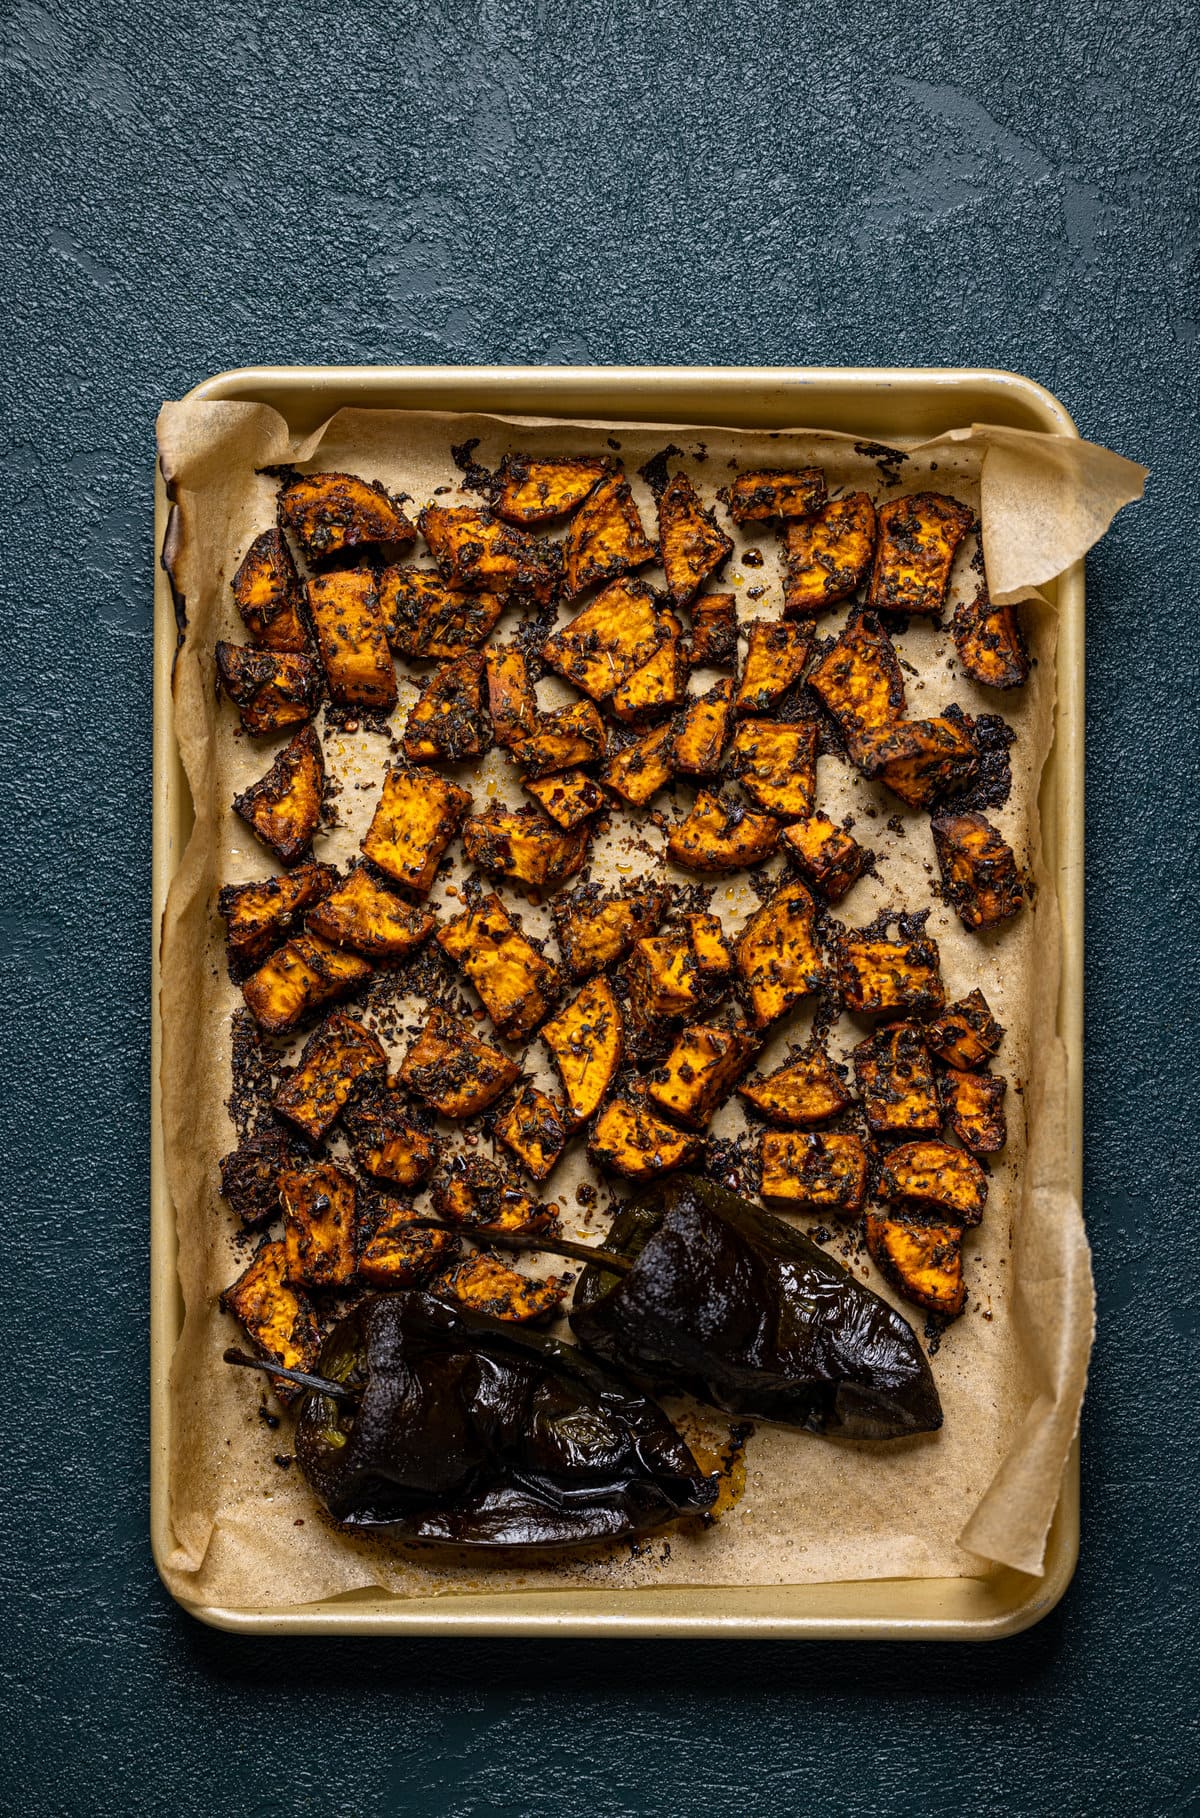 Sheet pan of seasoned and roasted peppers and diced sweet potatoes